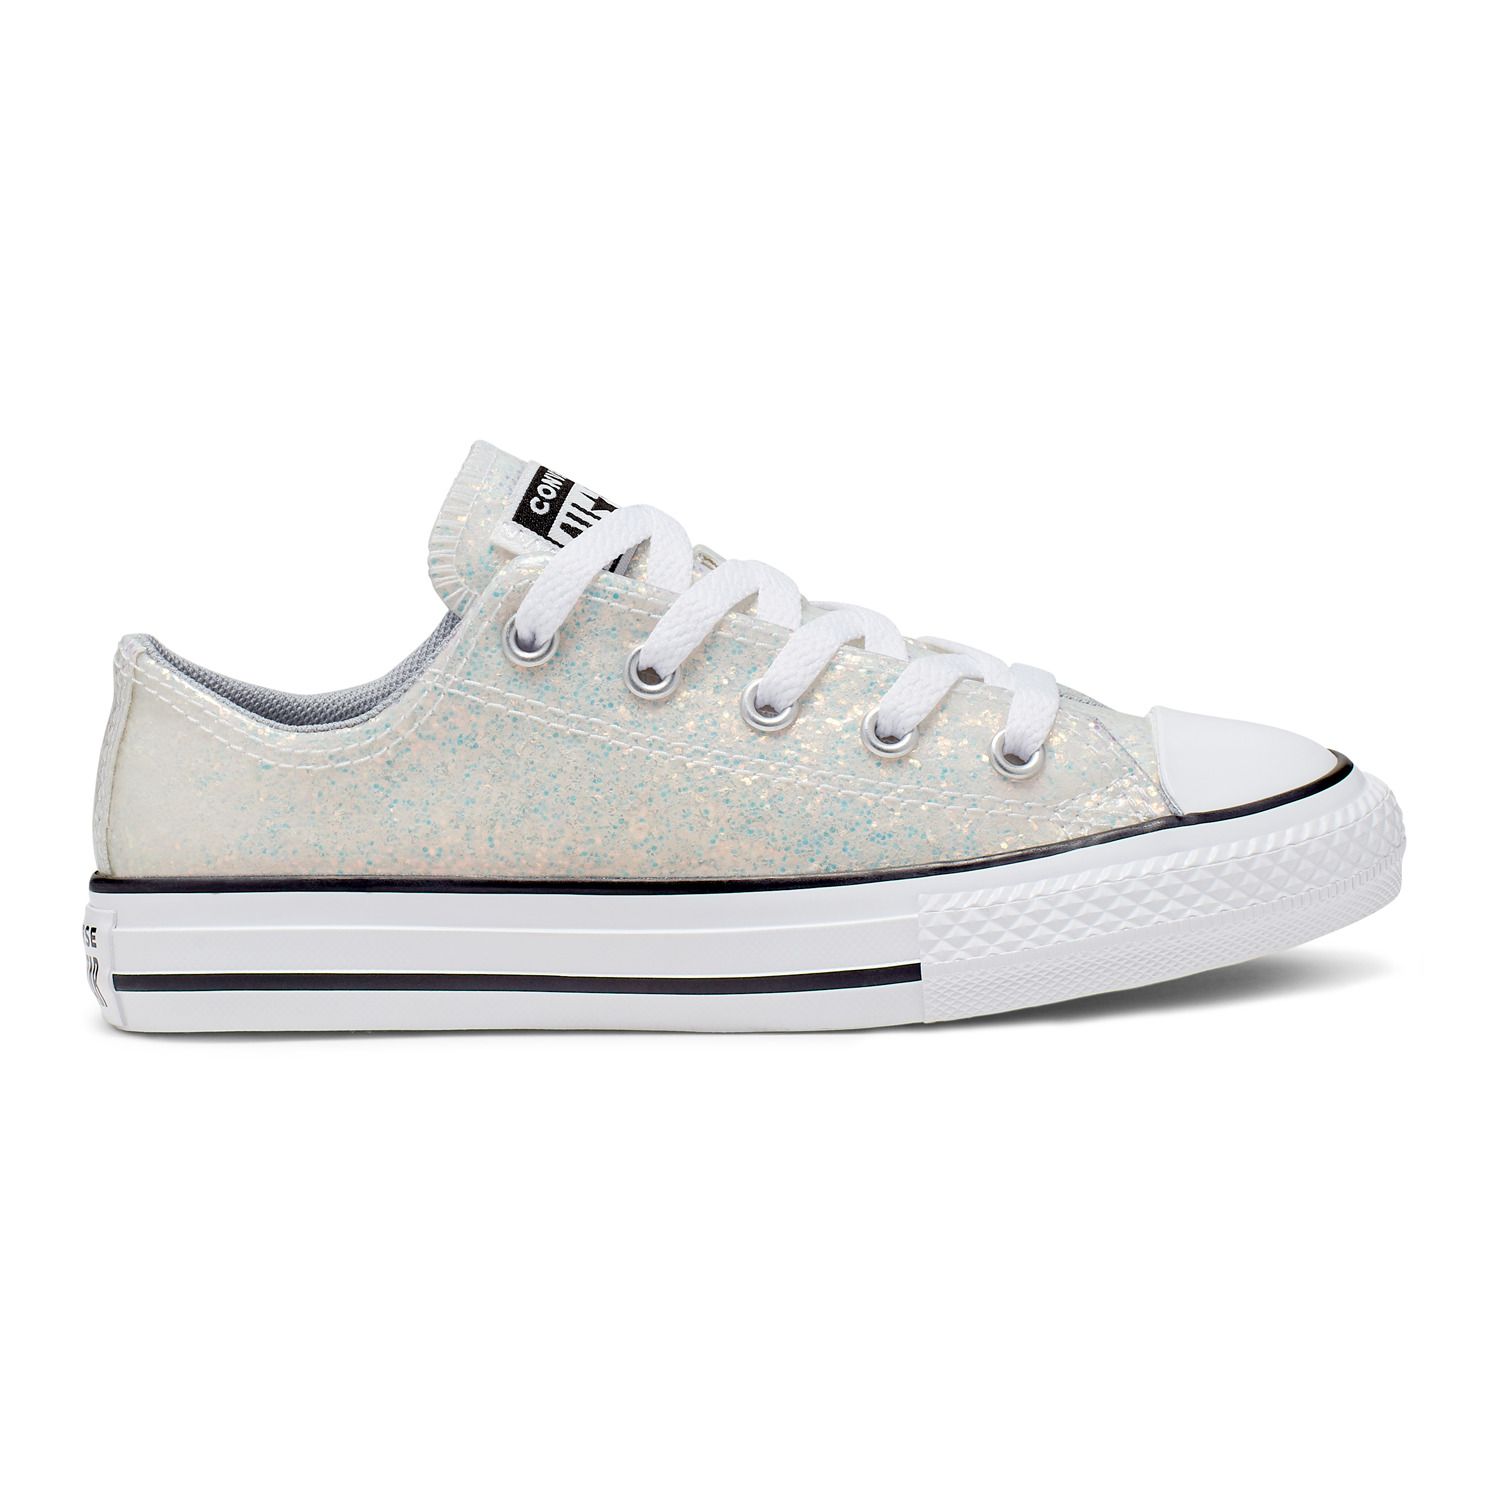 sparkling converse sneakers